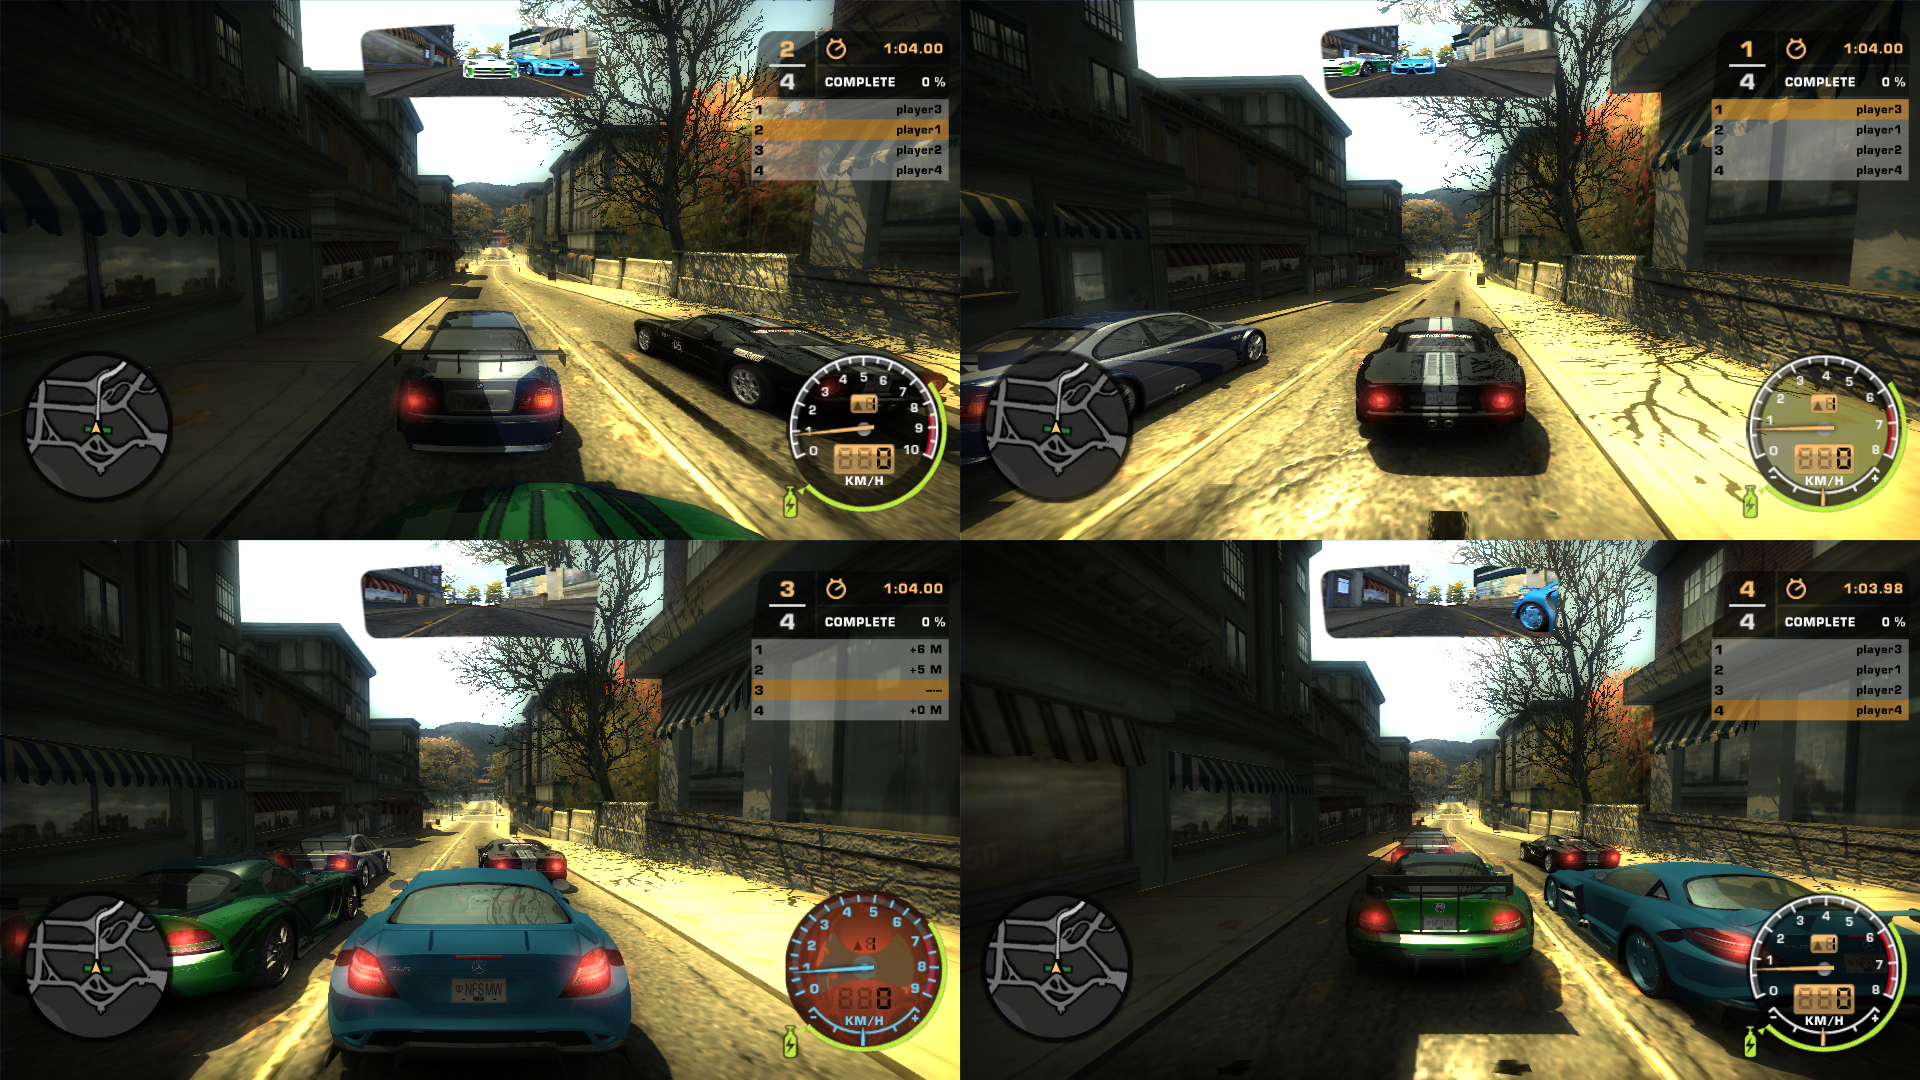 Most wanted ps3. NFS most wanted 2005 Split Screen. NFS most wanted Xbox 360 скрин. Need for Speed most wanted 2005 Xbox 360.